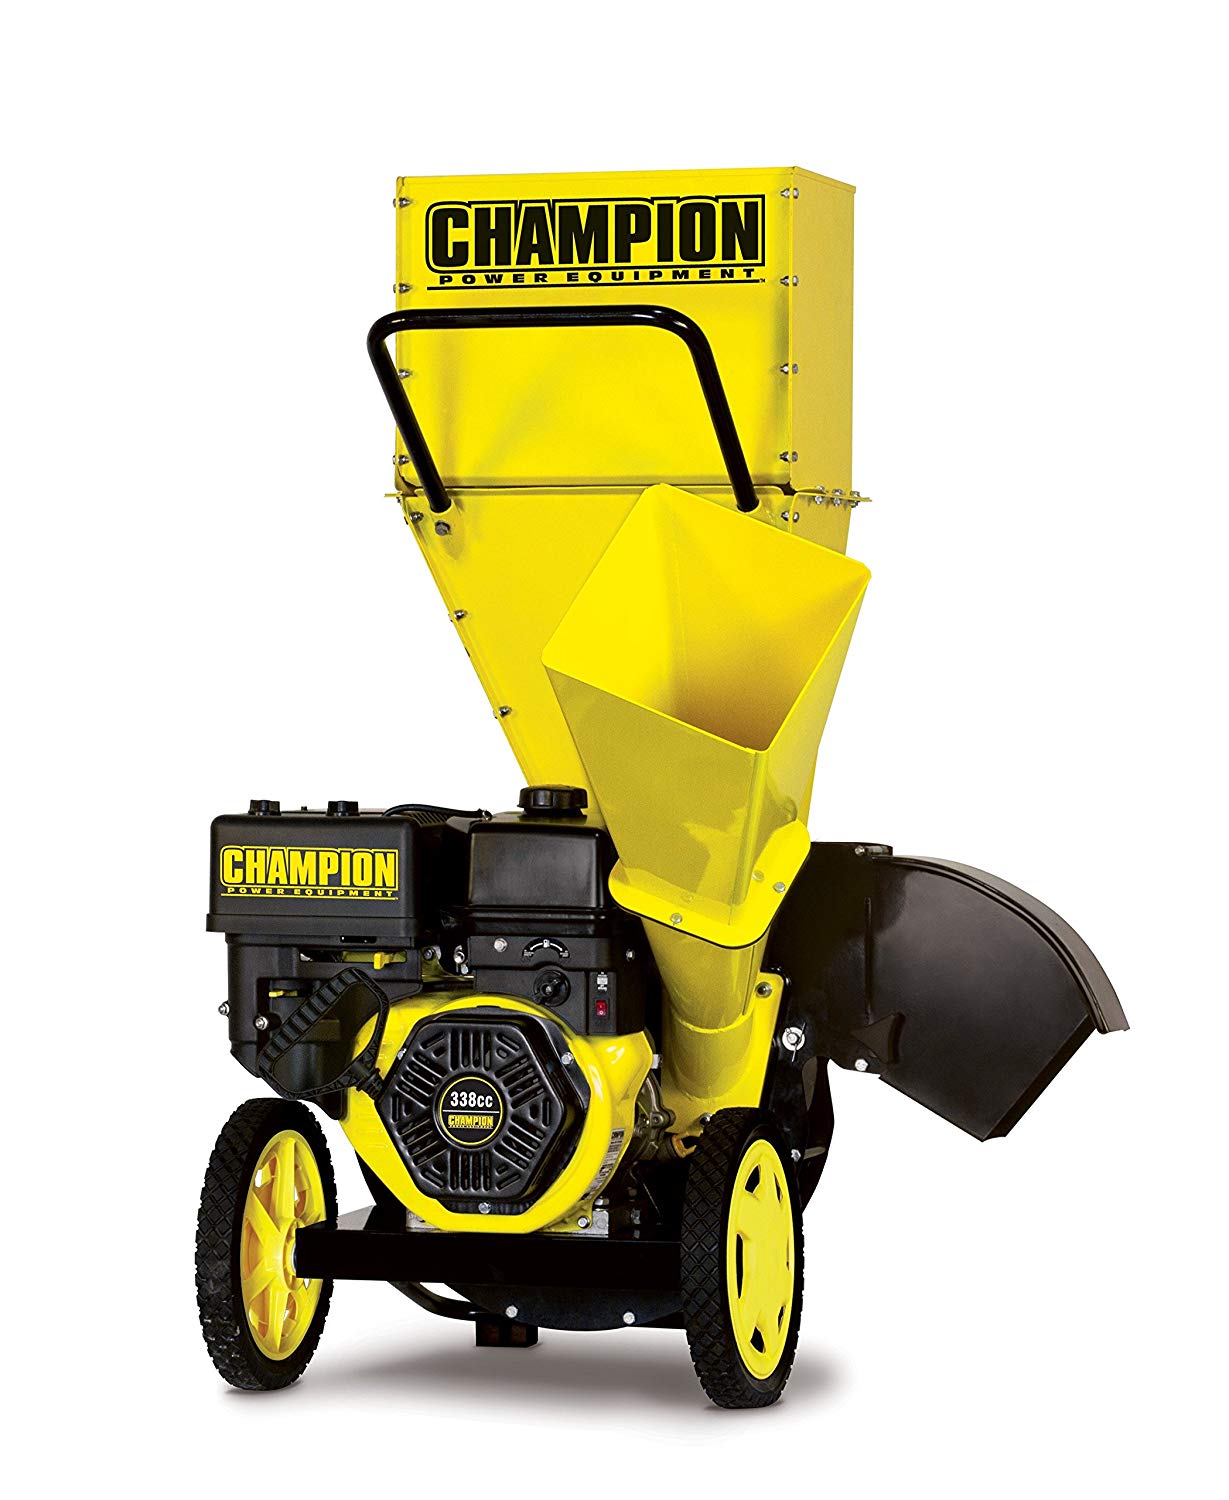 Champion 3-Inch Portable Chipper-Shredder with Collection Bag - chipper shredders